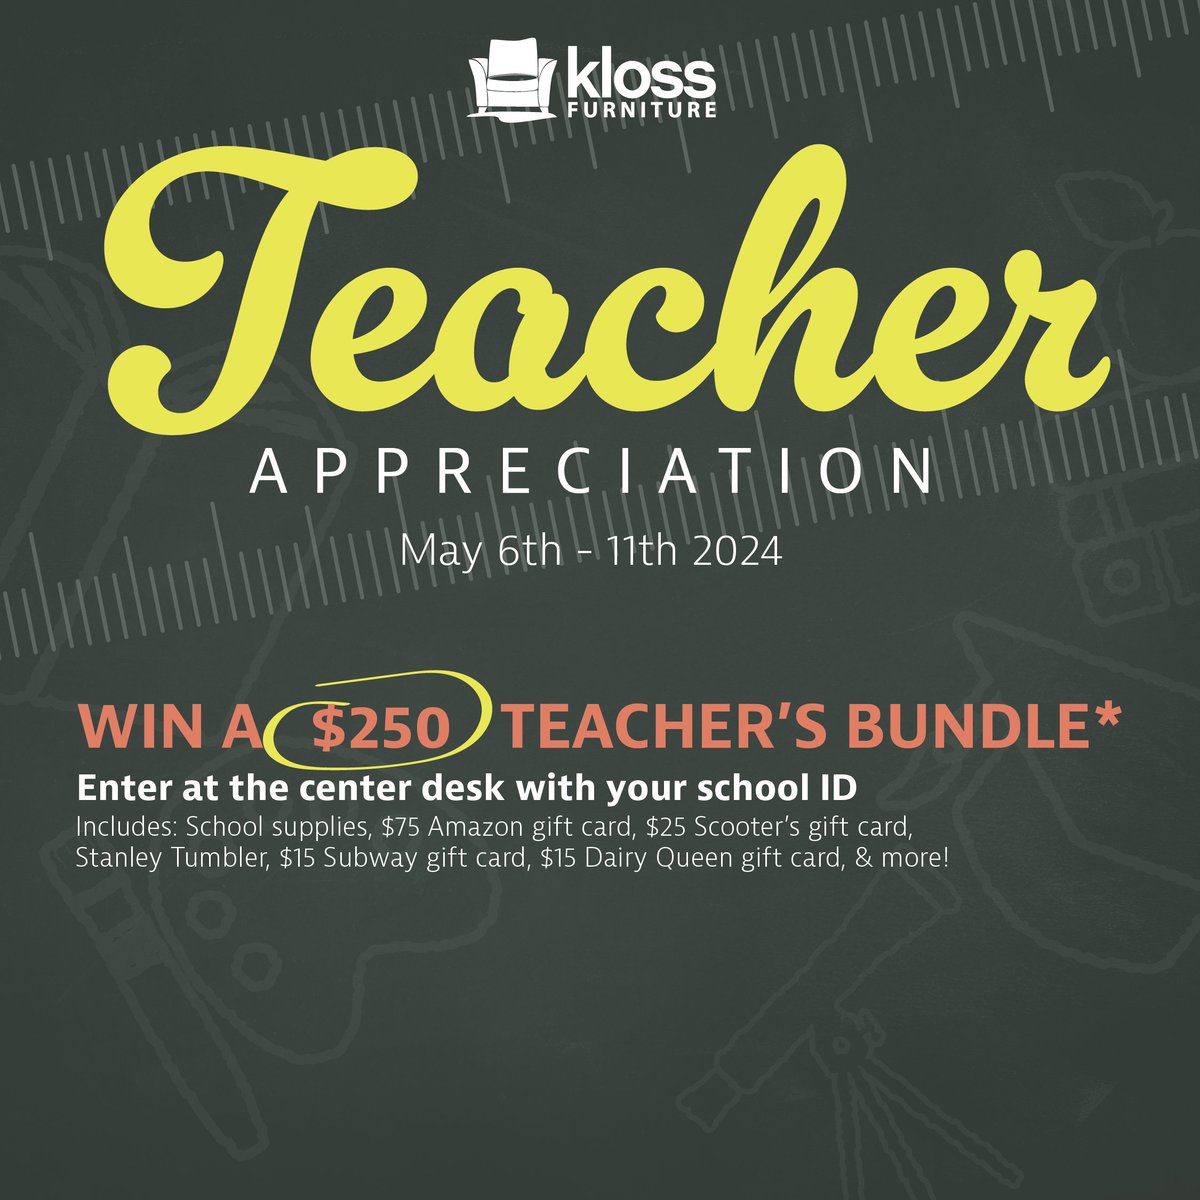 We appreciate you! If you are a teacher, come to any of our store locations and sign up for a $250 Teacher's bundle. 

*restrictions apply. See store for details. 5 bundles per store.

#klosstohome #localbusiness #teachersappreciation